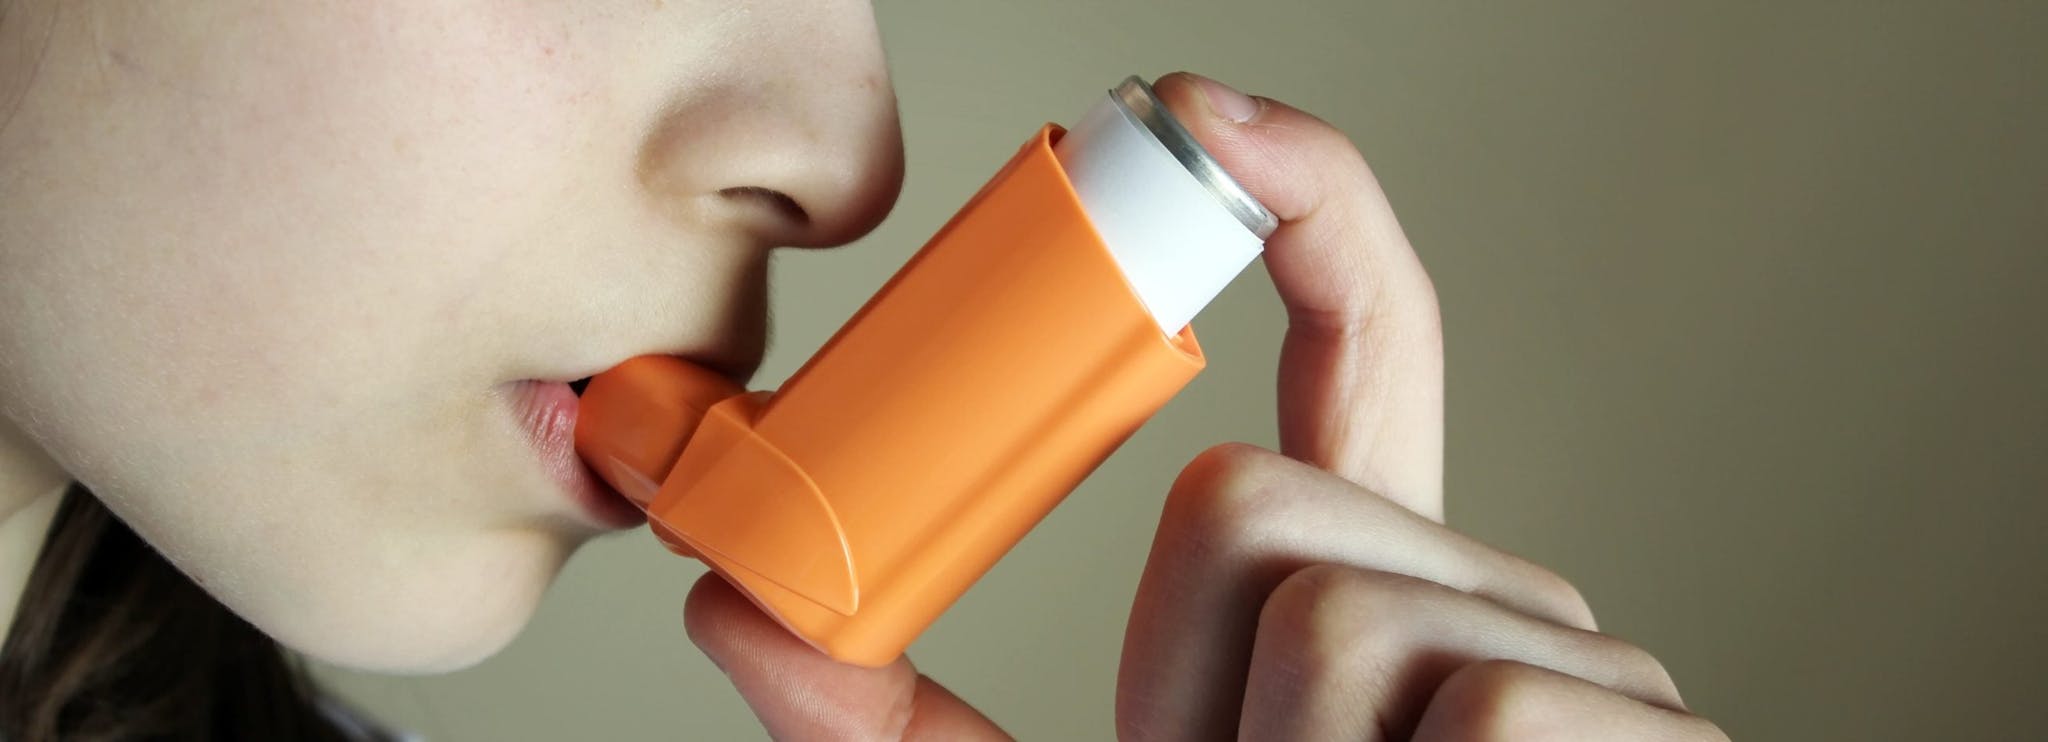 What are the causes of Asthma